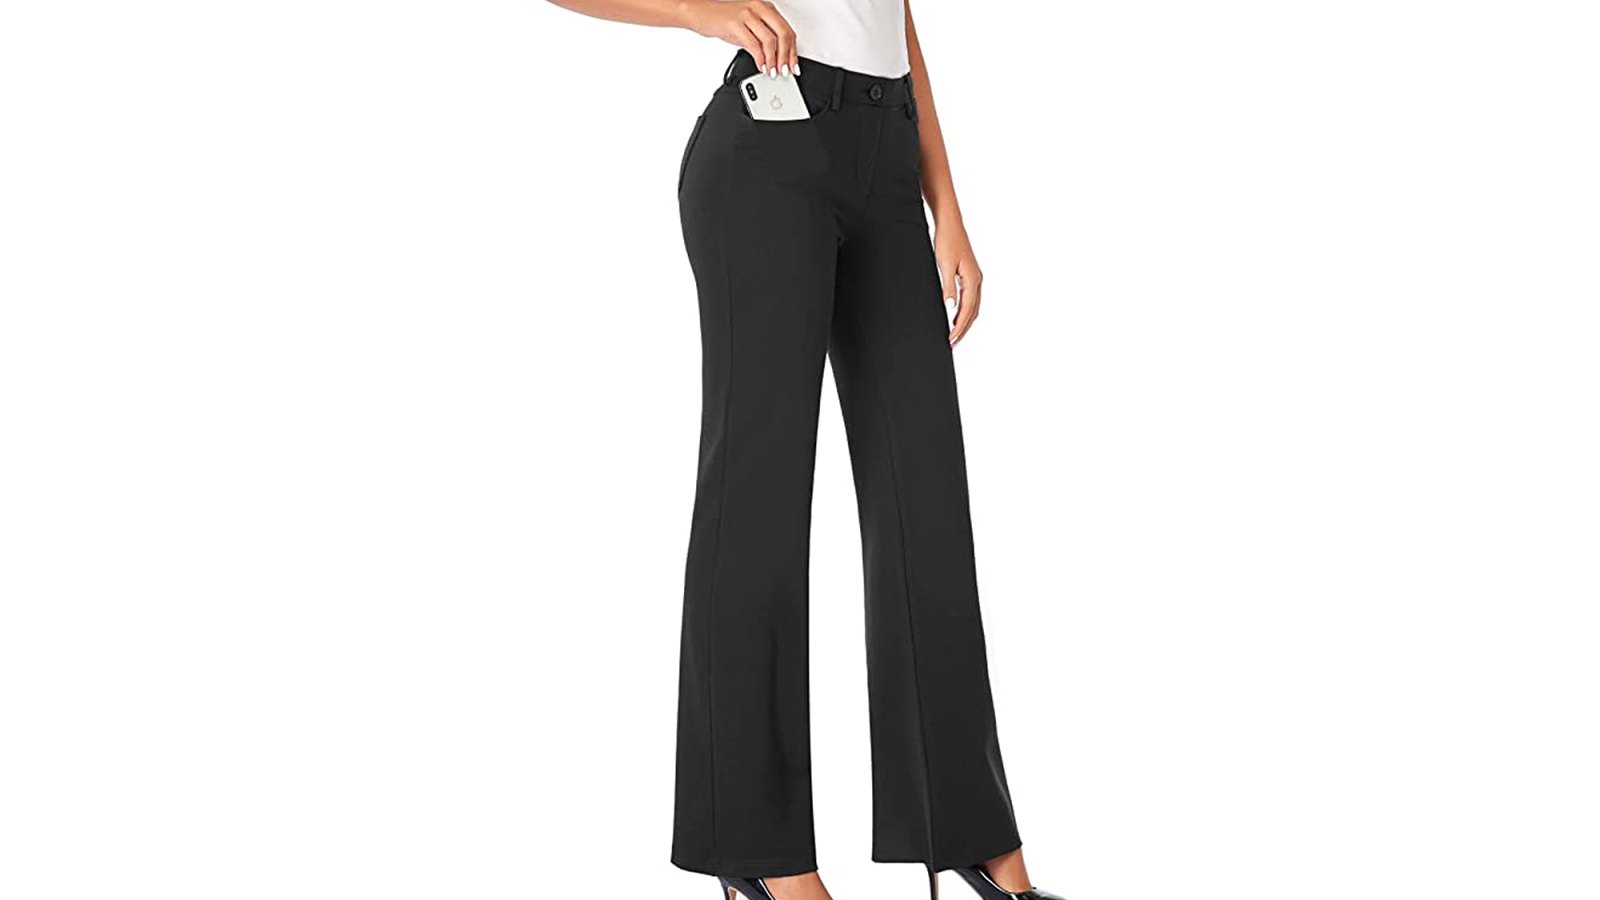 Tapata Comfy Dress Pants Have Pockets and Many Sizes